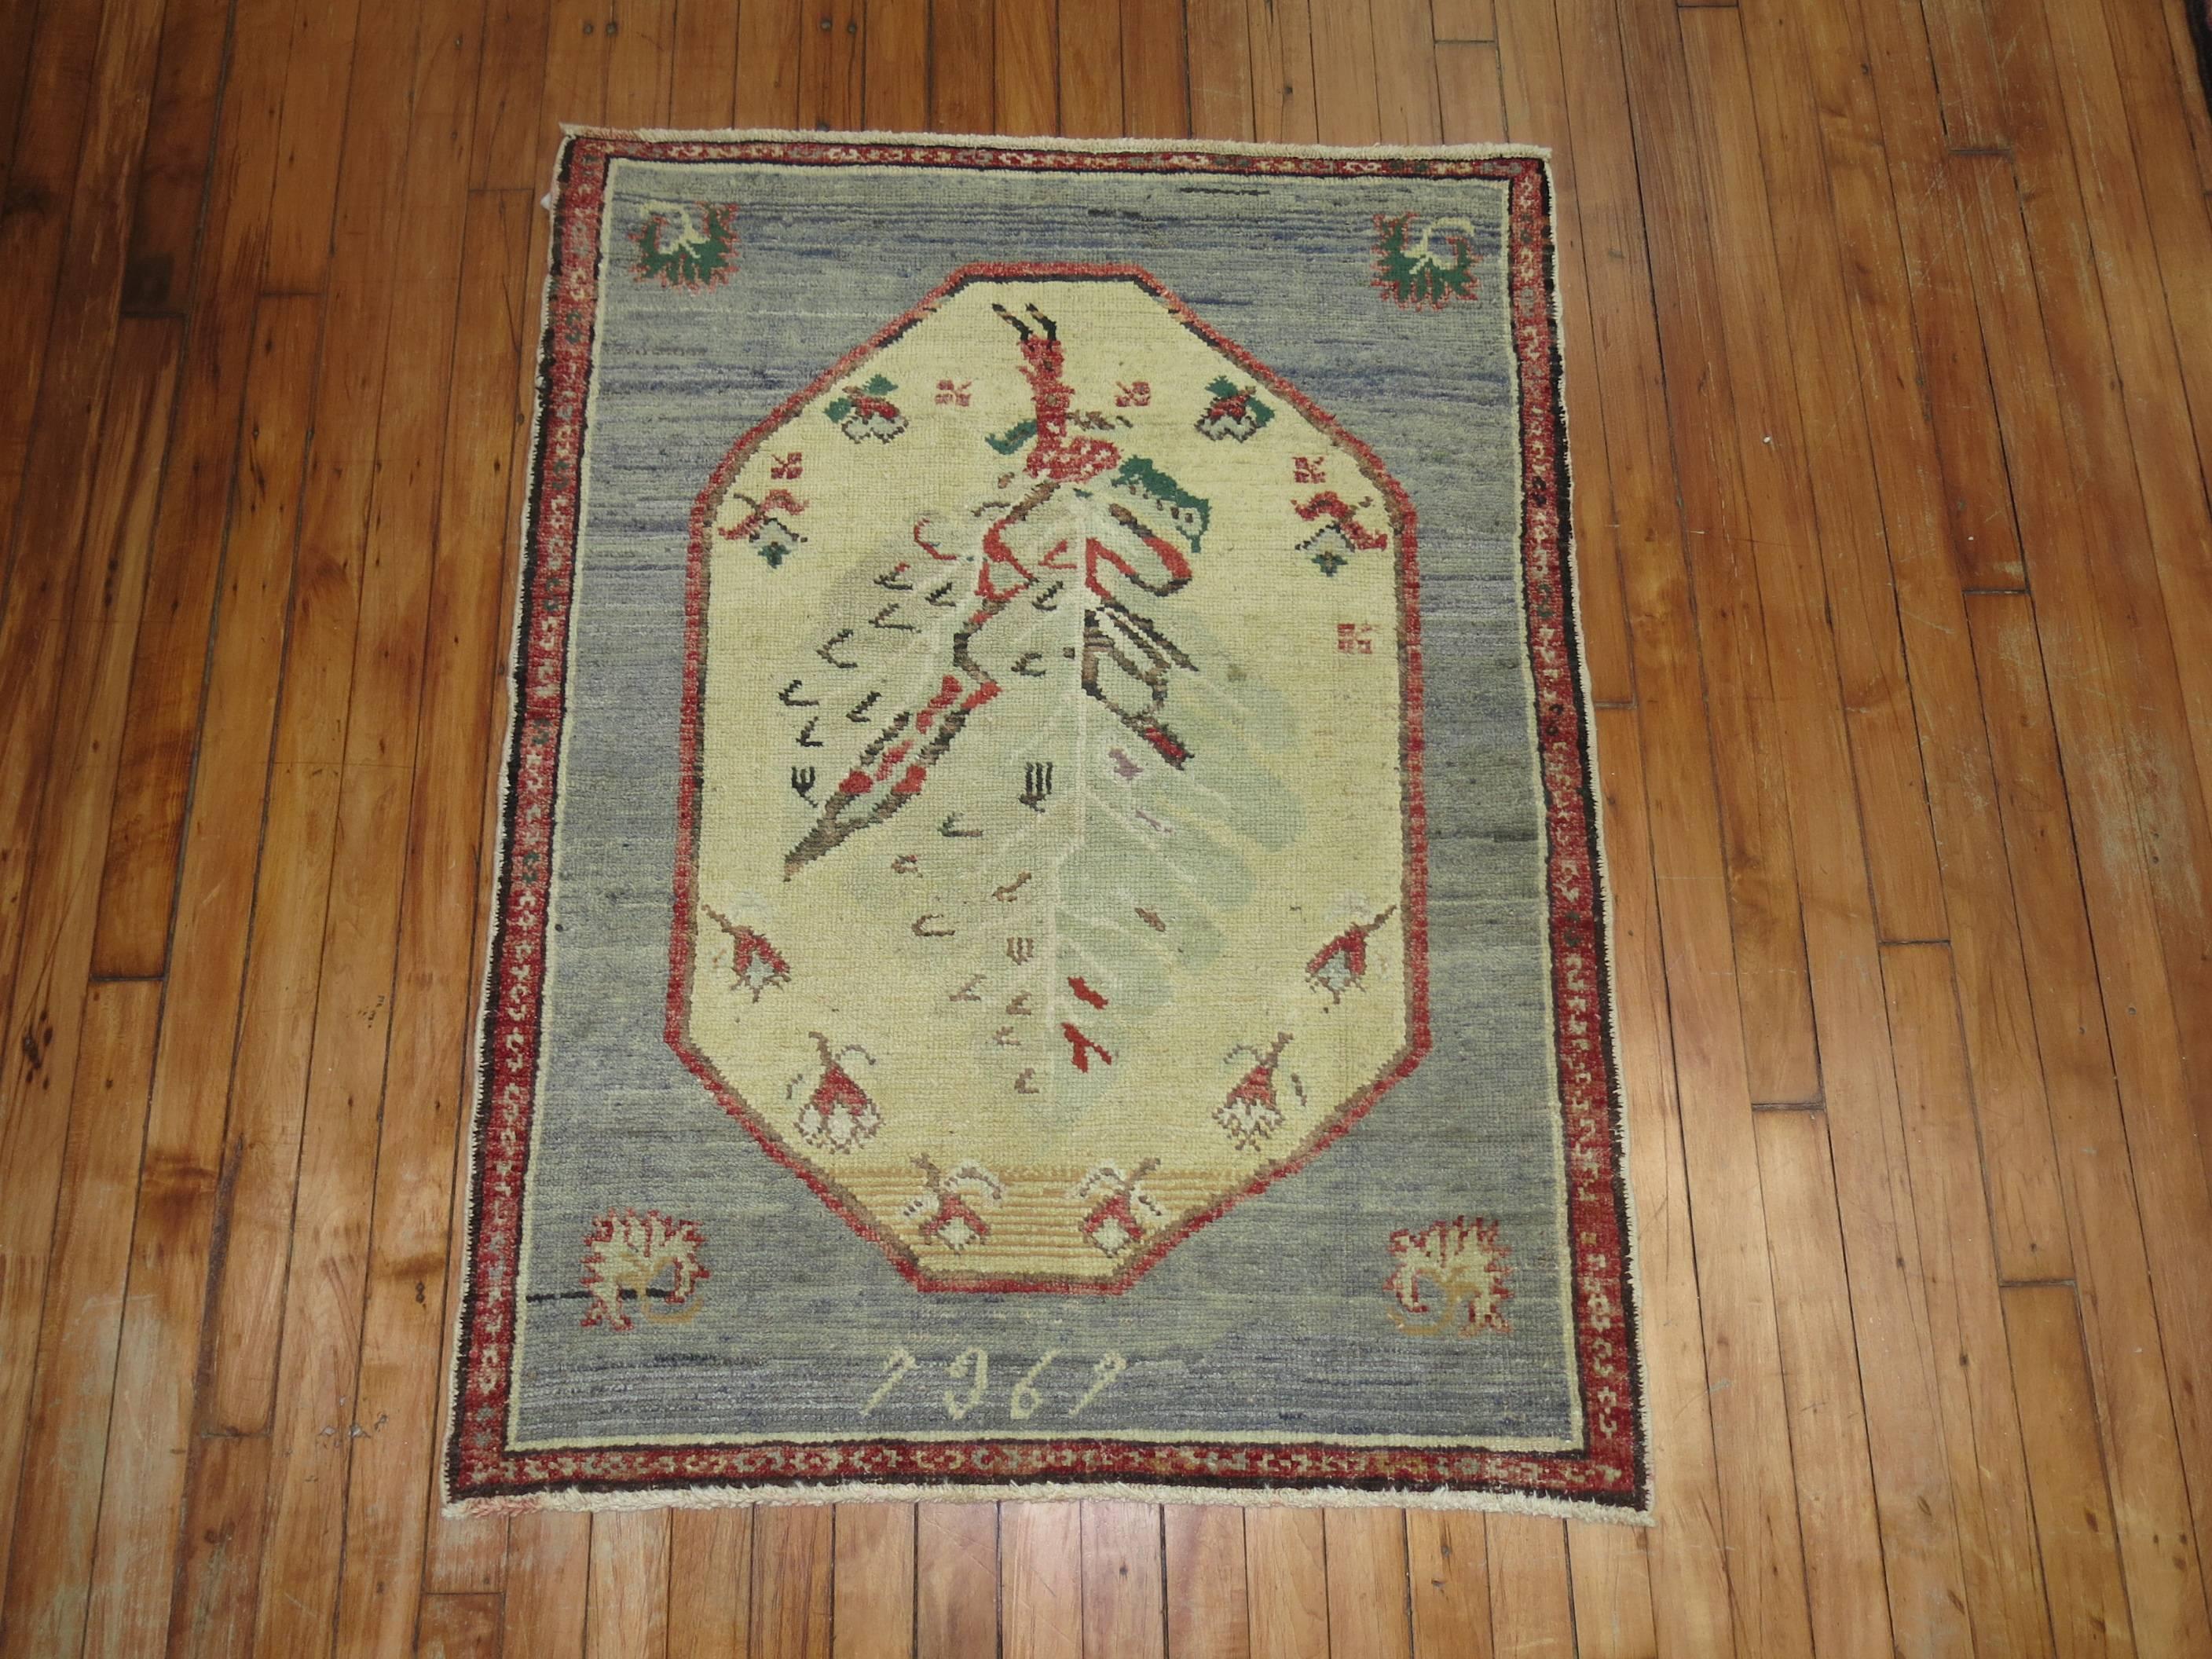 Vintage Turkish Anatolian rug with a trapezoid shaped medallion on a grayish blue field, accents in beige, rust red and green.

Measures: 2'11